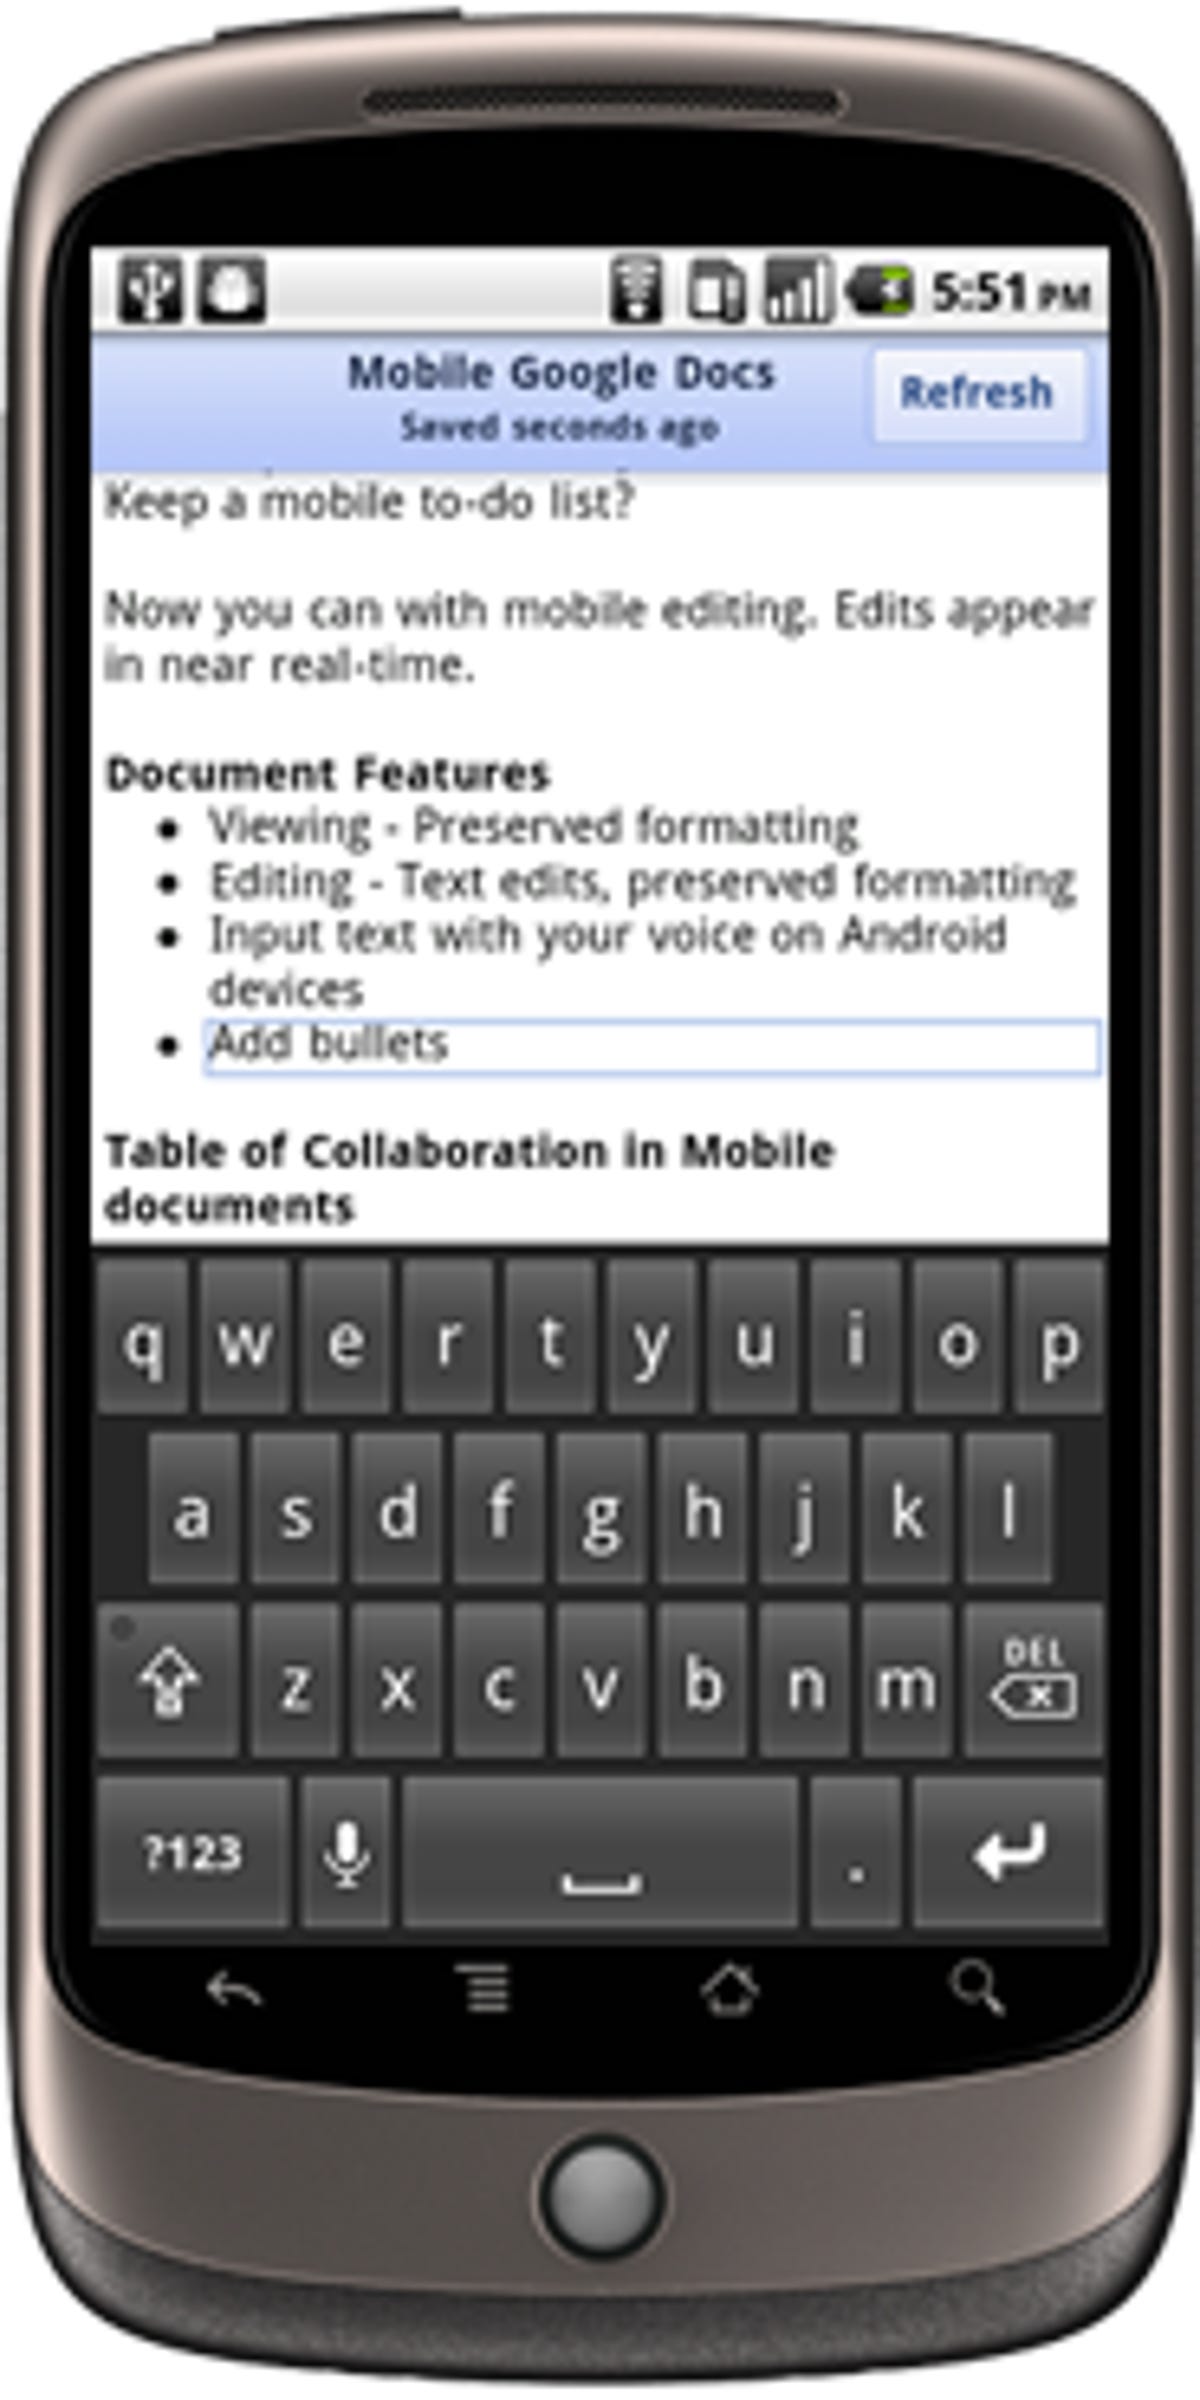 Android phones, iPhones, and iPads now can be used to edit Google Docs word processing documents.